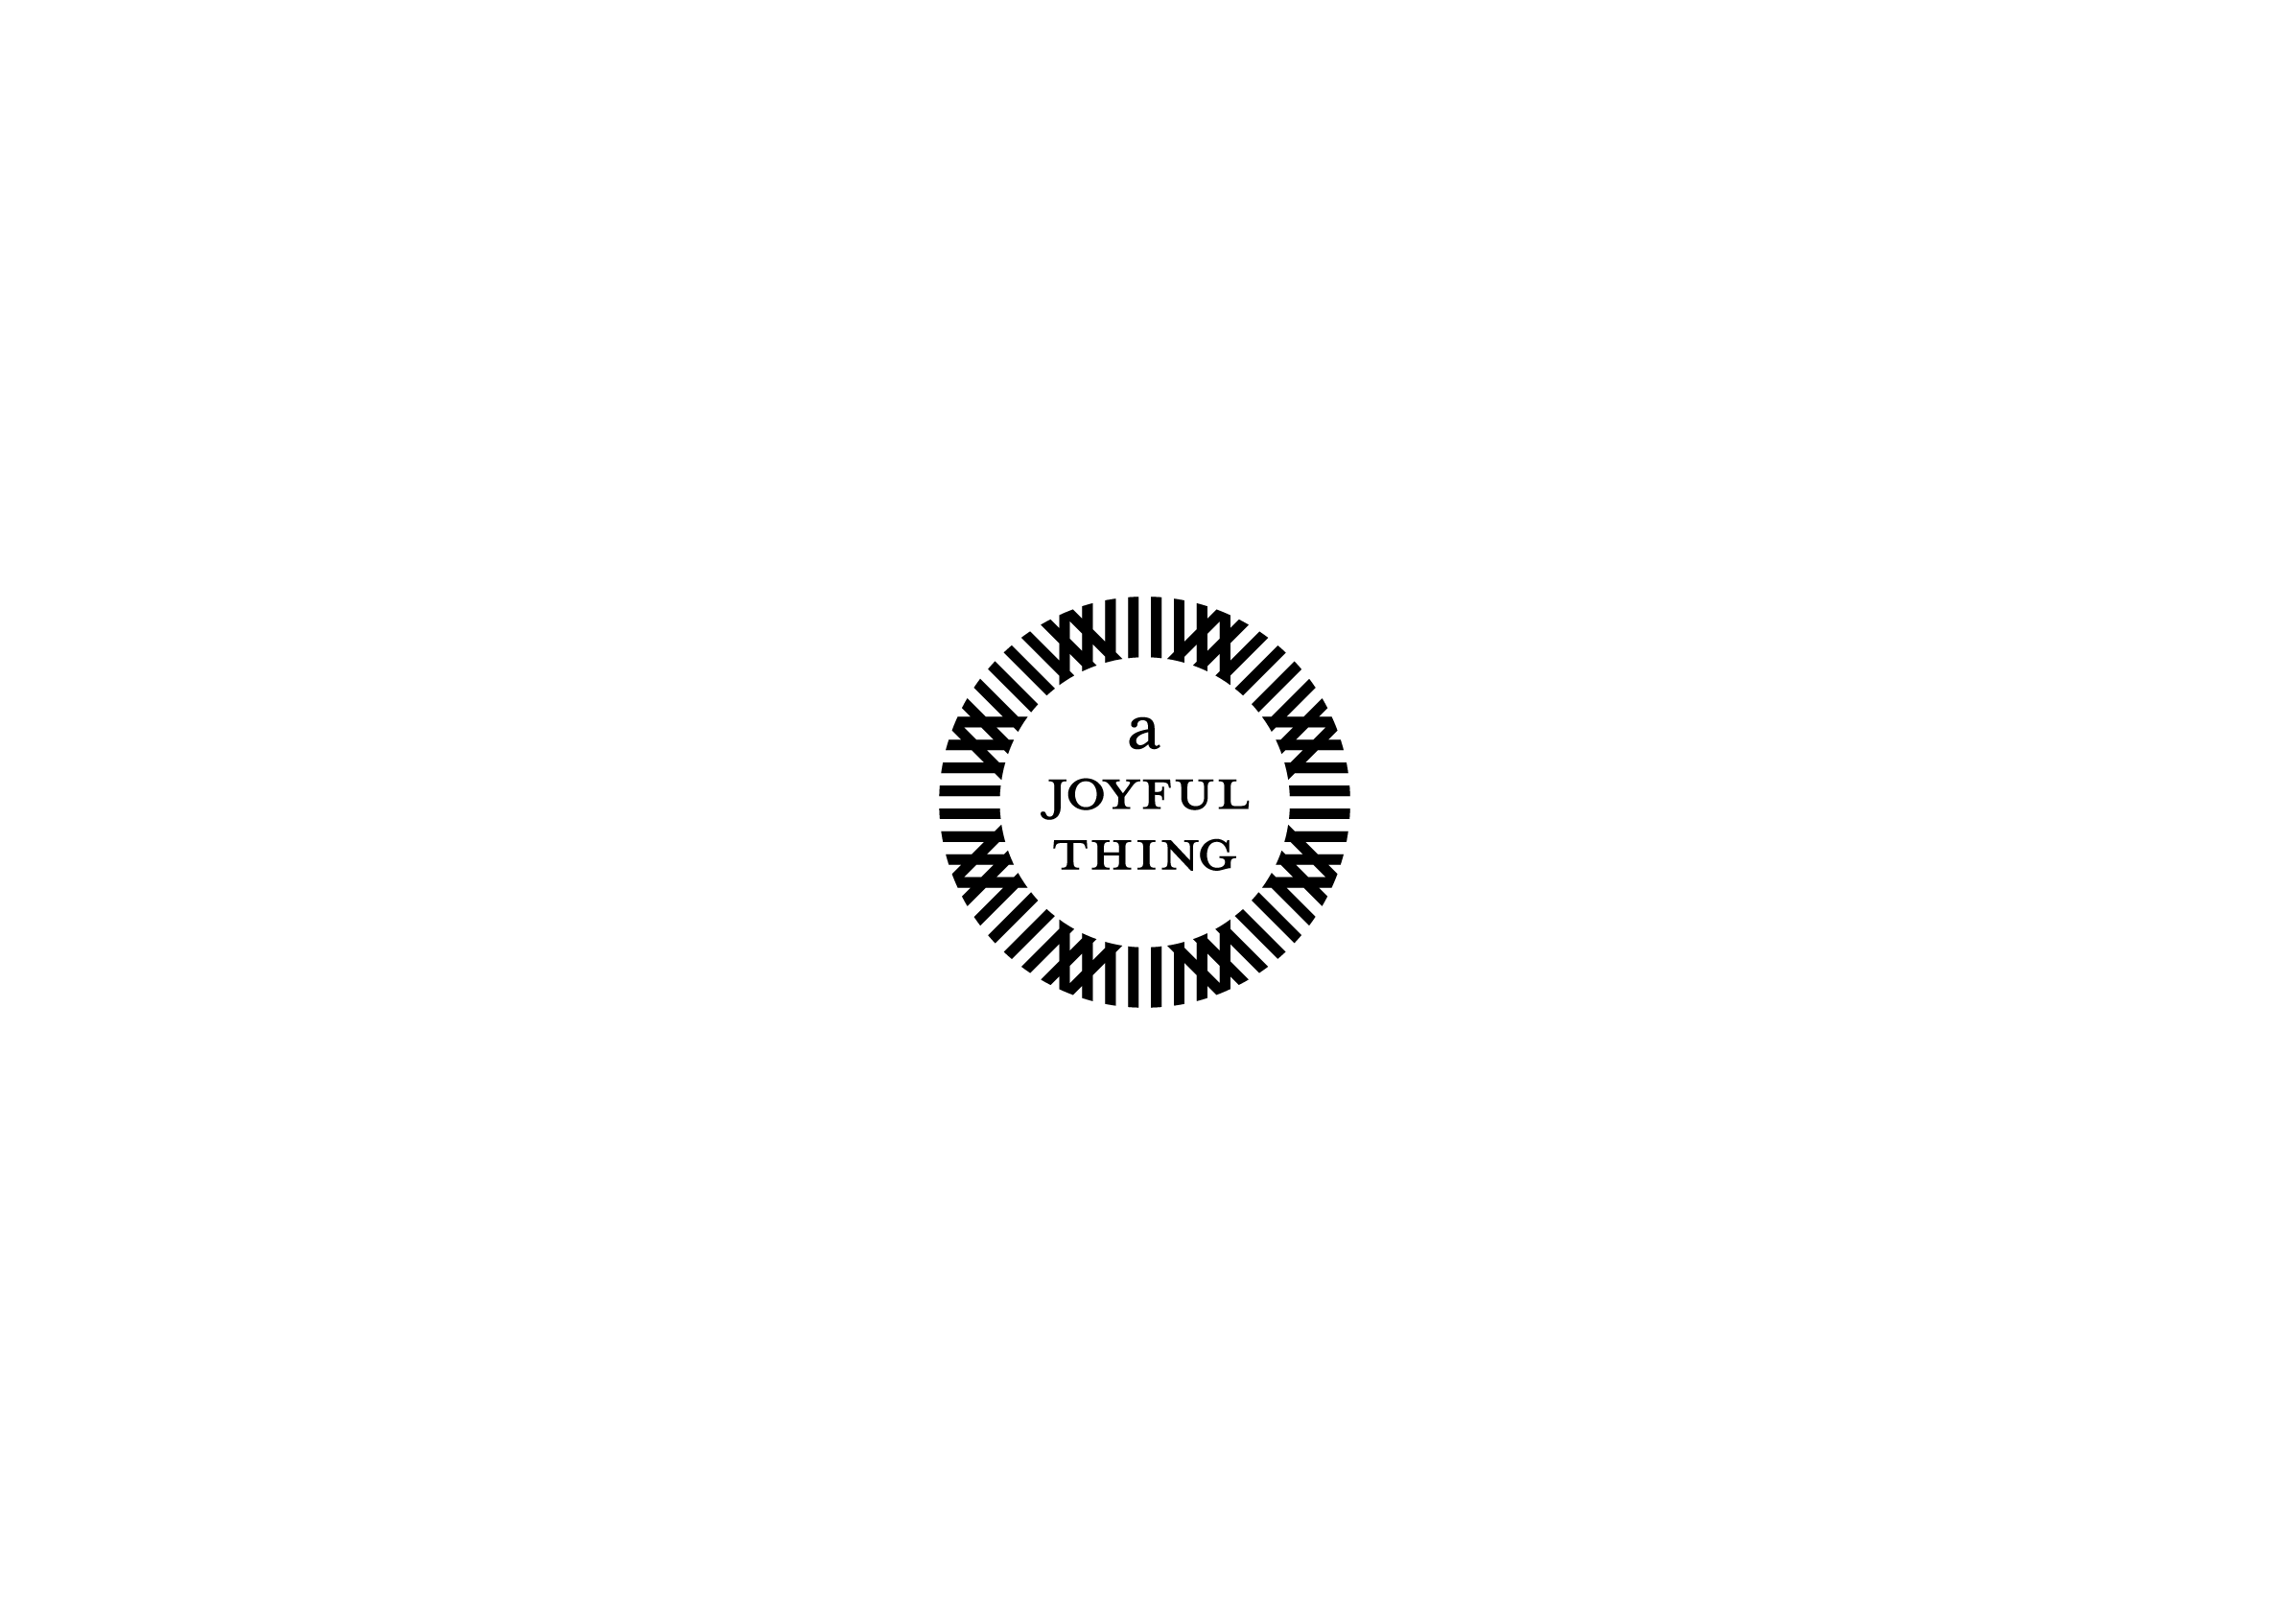 Logo Black for A Joyful Thing, a well-being company by Ottawa Graphic Design Studio idApostle